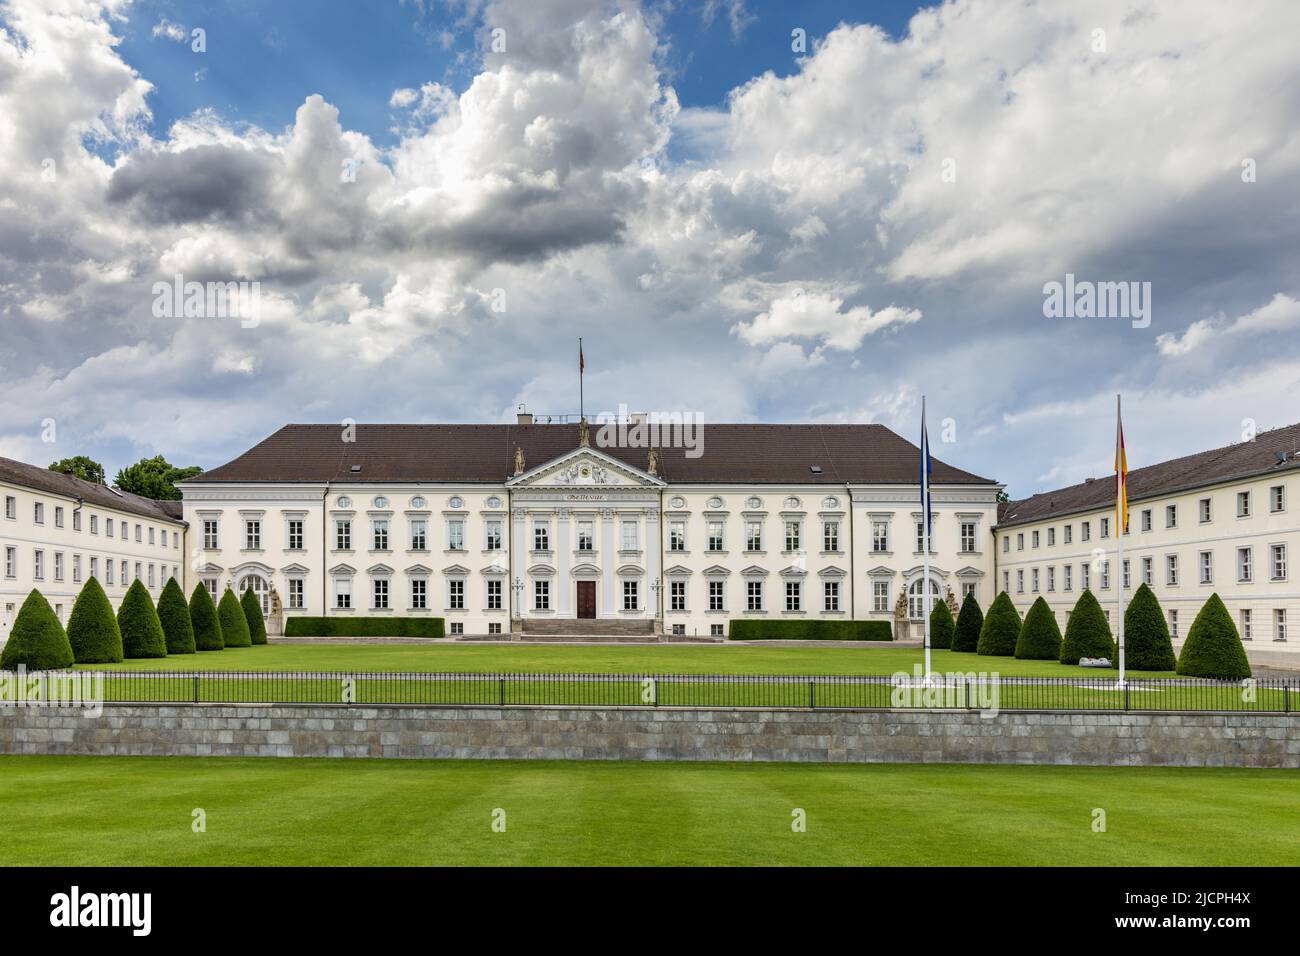 Bellevue Palace in Berlin, the official residence of the President of Germany. Stock Photo